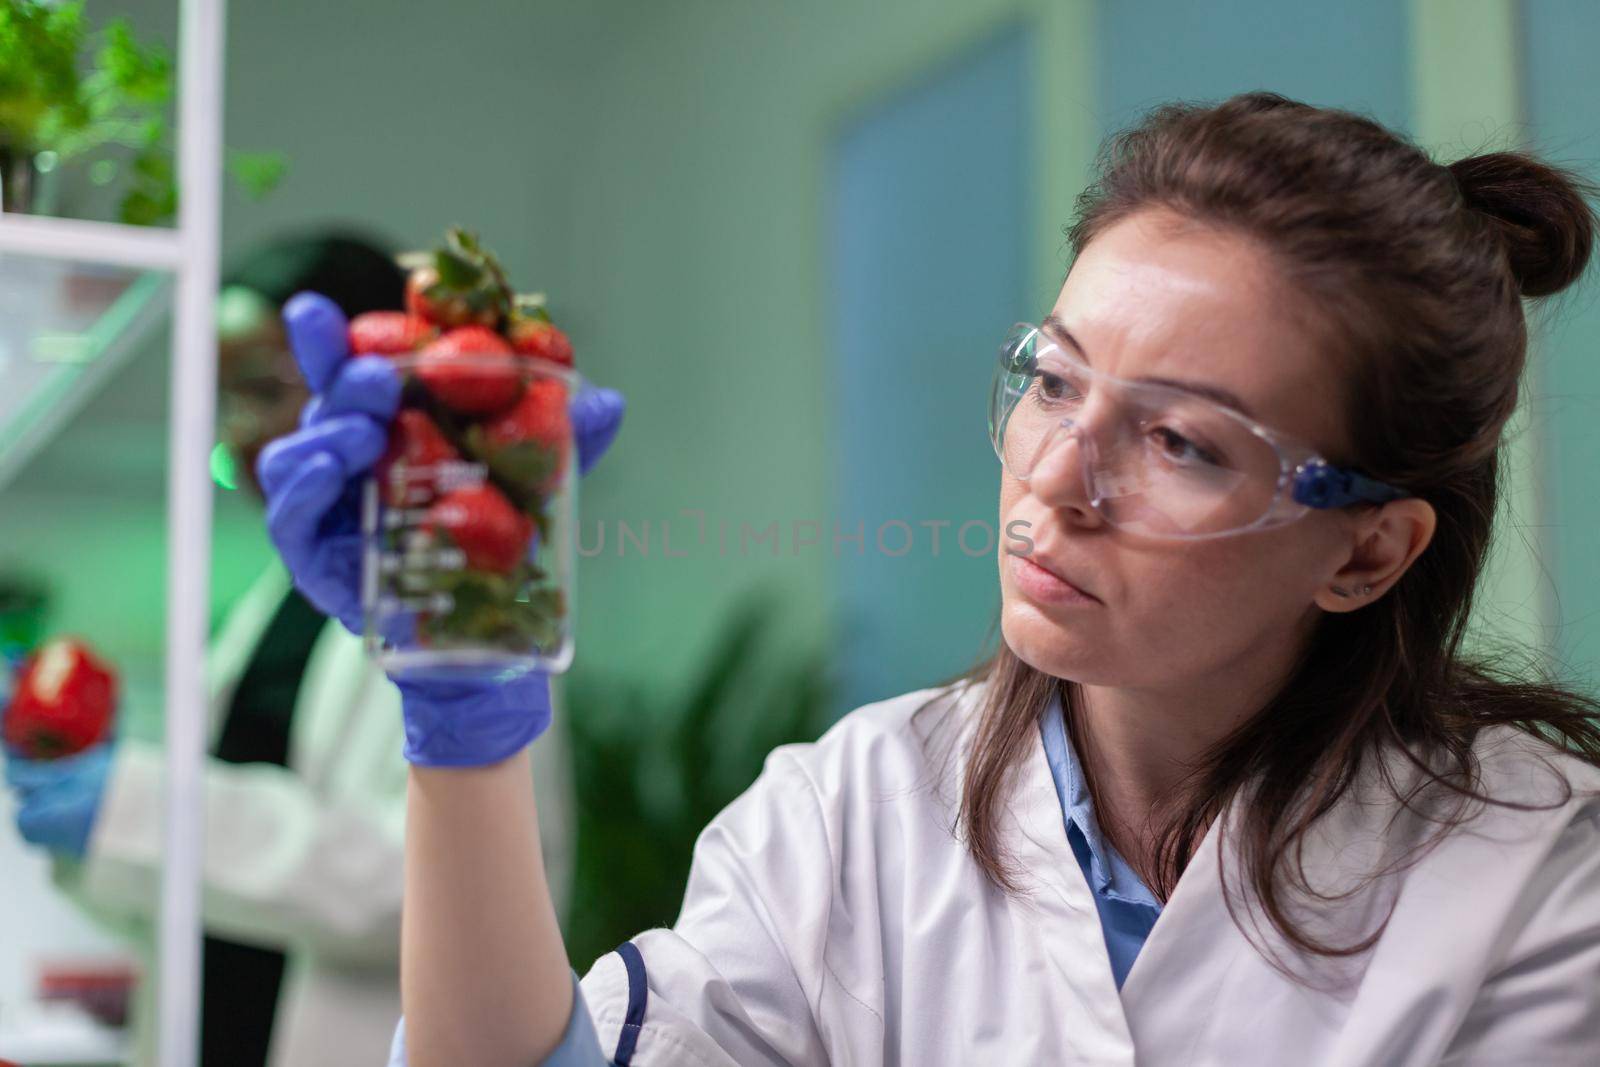 Researcher holding glas with strawberry injected with pesticides by DCStudio